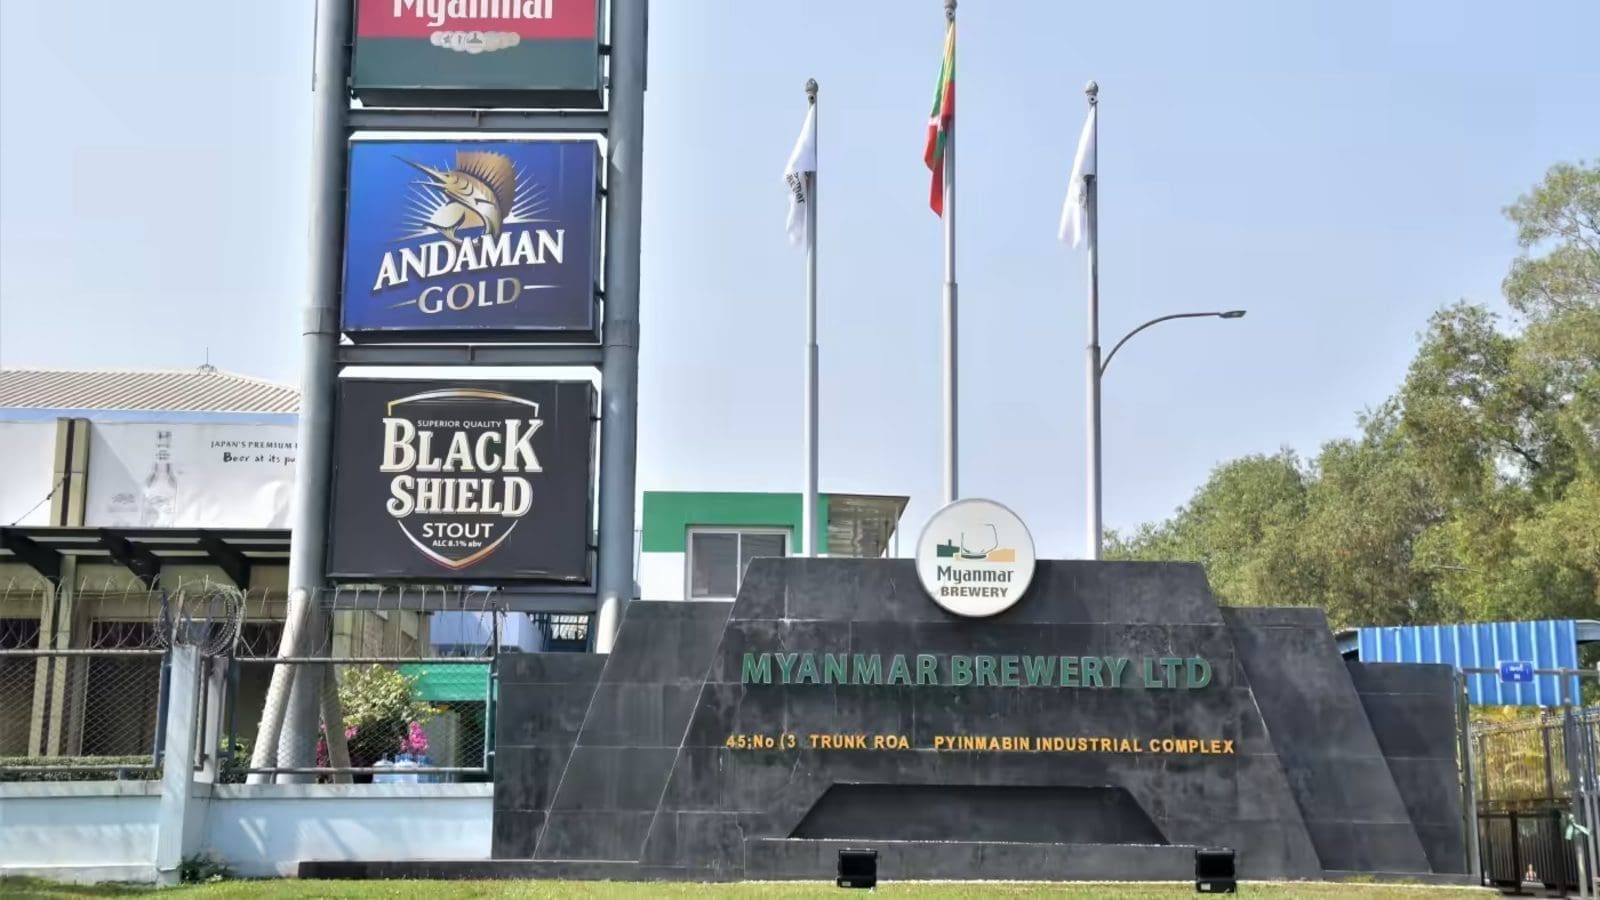 Kirin Holdings completes sale of 51% stake for US$160m to Myanmar Brewery Limited